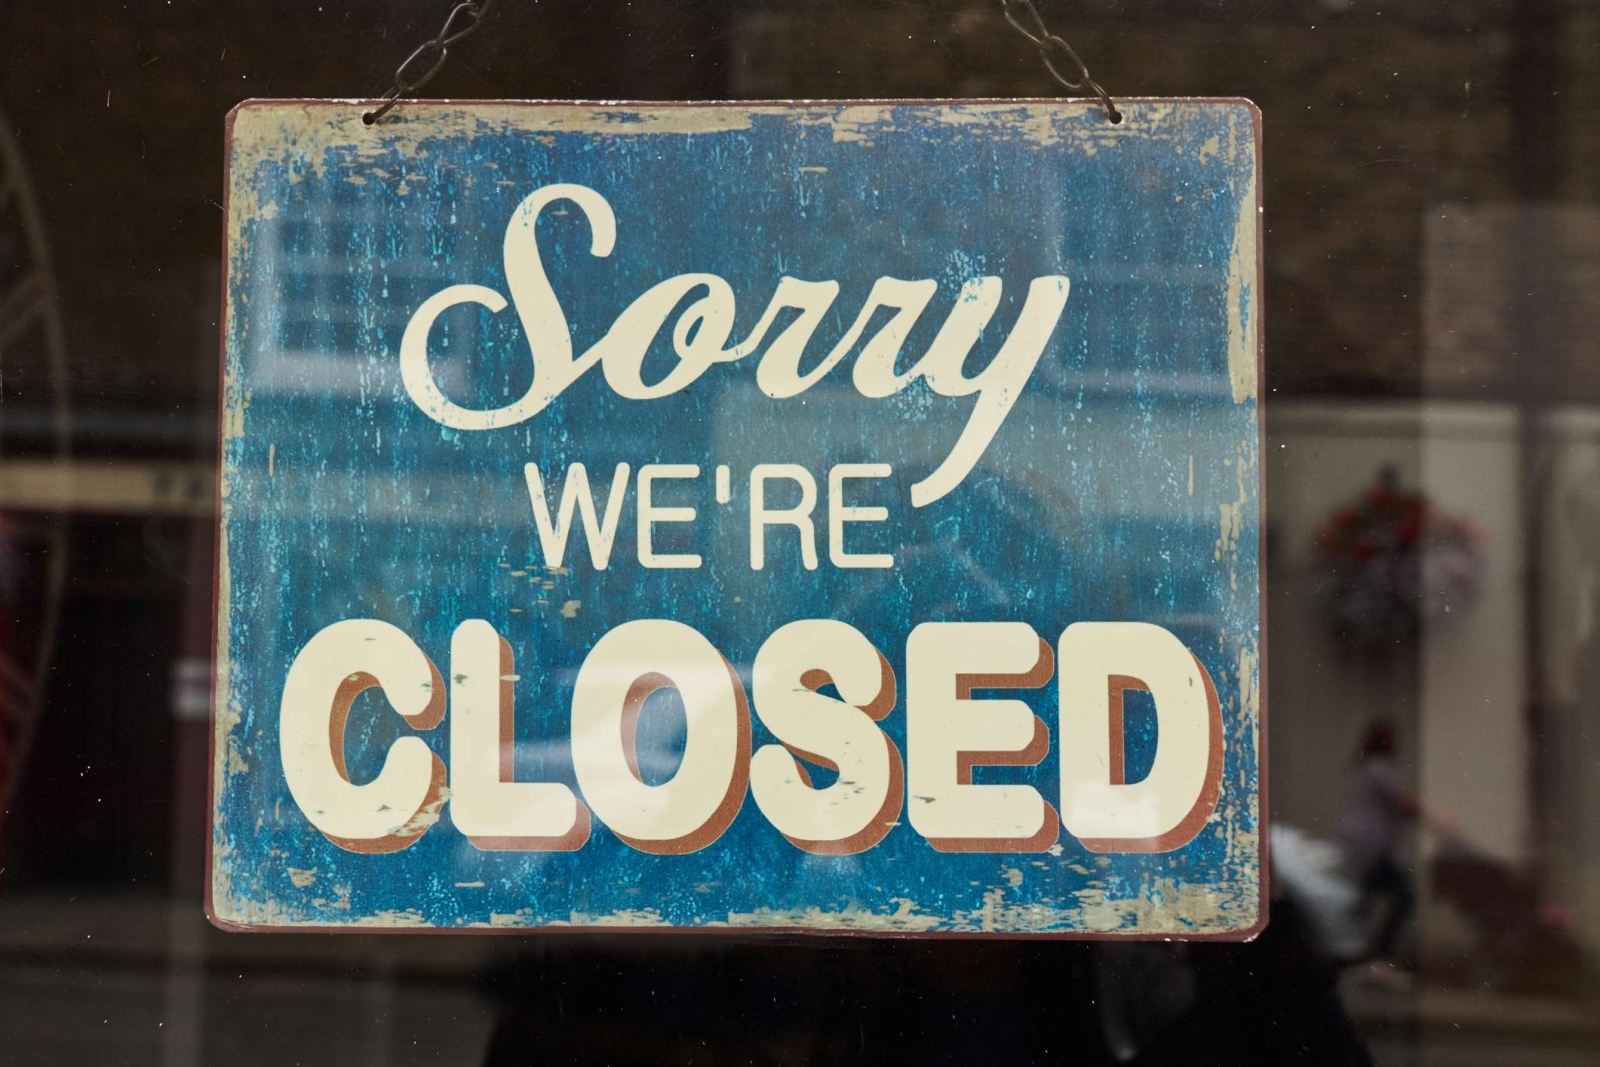 Sorry we closed. Sorry we”re is добро. Sorry we are booked картинки. Sorry we're closed.